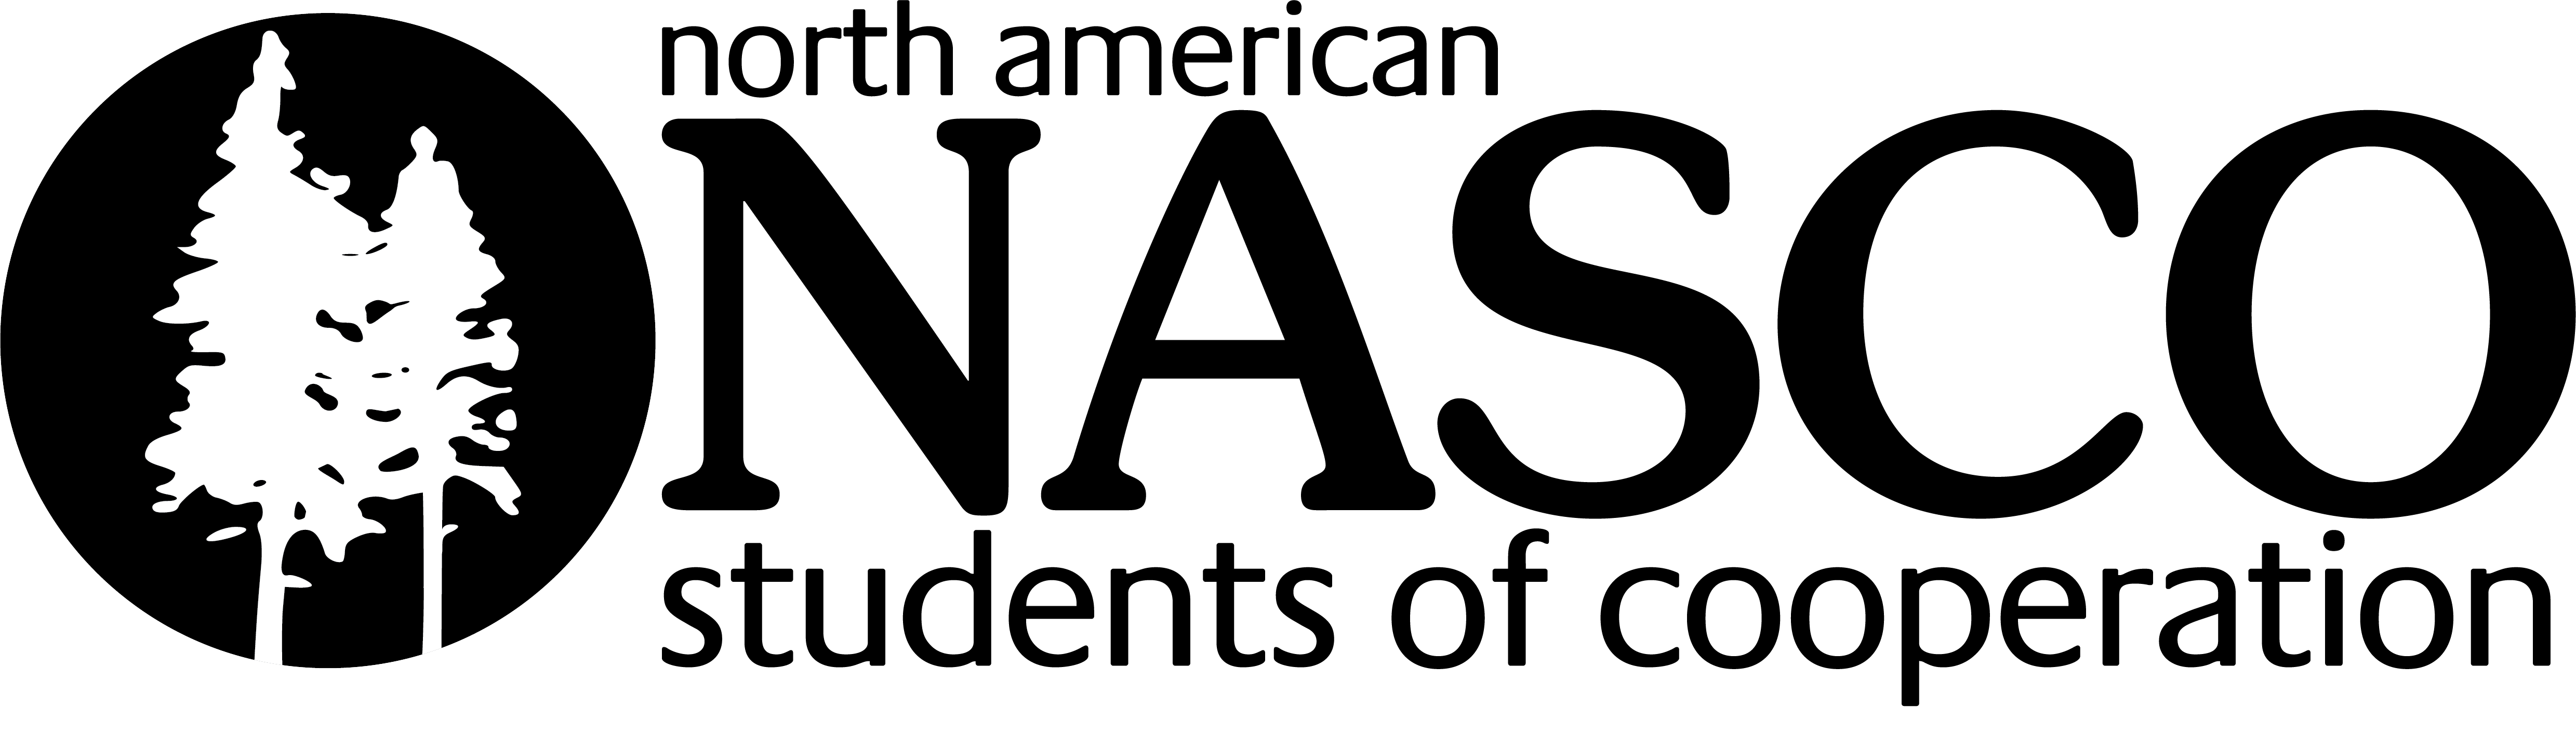 North American Students of Cooperation (NASCO)